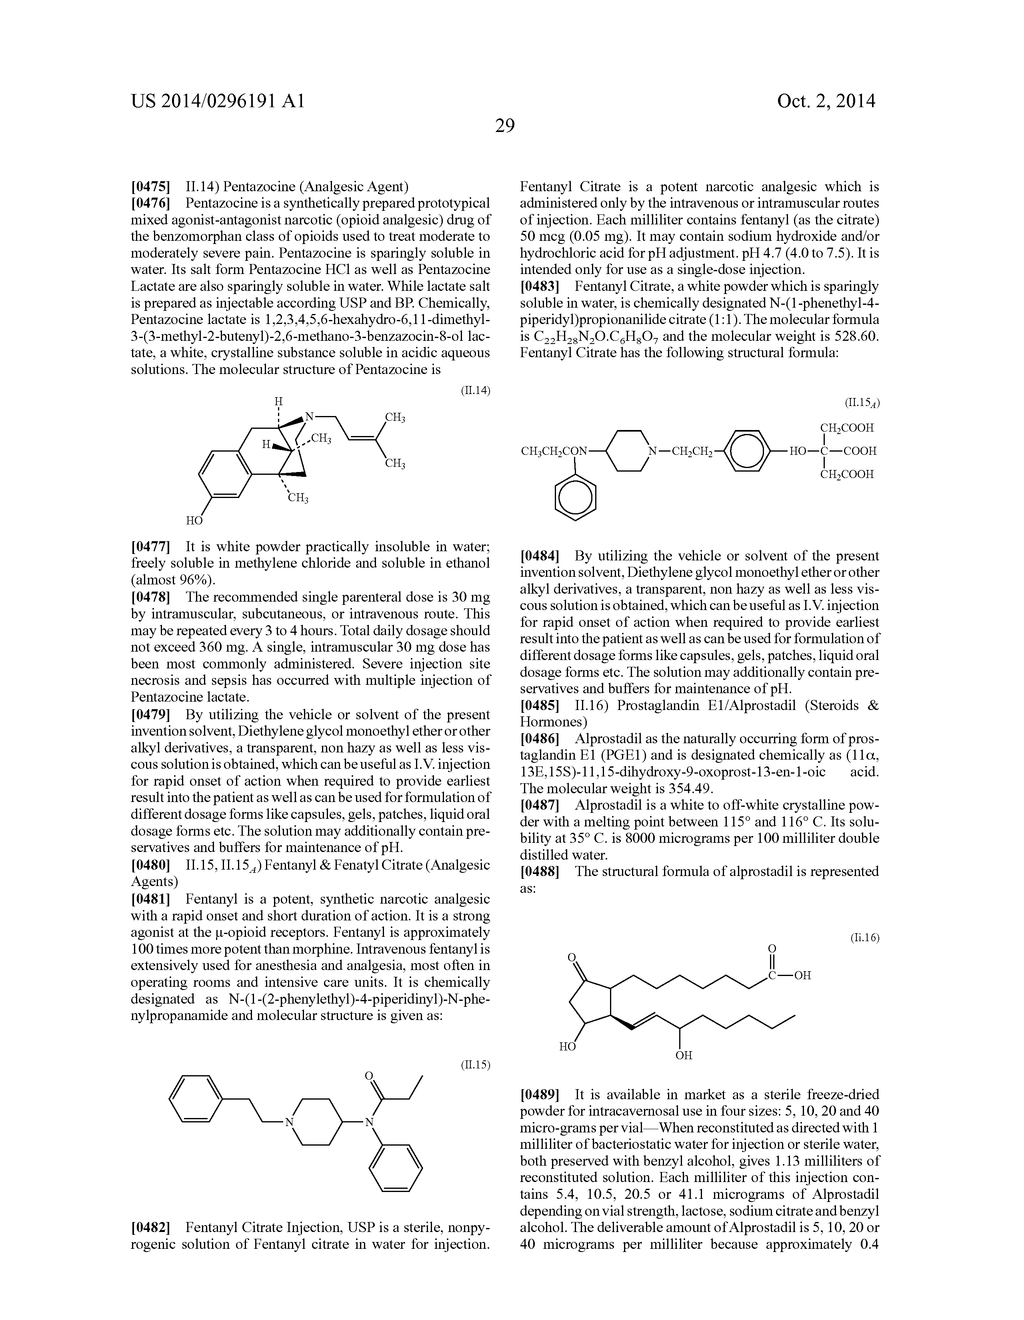 COMPOSITIONS OF PHARMACEUTICAL ACTIVES CONTAINING DIETHYLENE GLYCOL     MONOETHYL ETHER OR OTHER ALKYL DERIVATIVES - diagram, schematic, and image 31